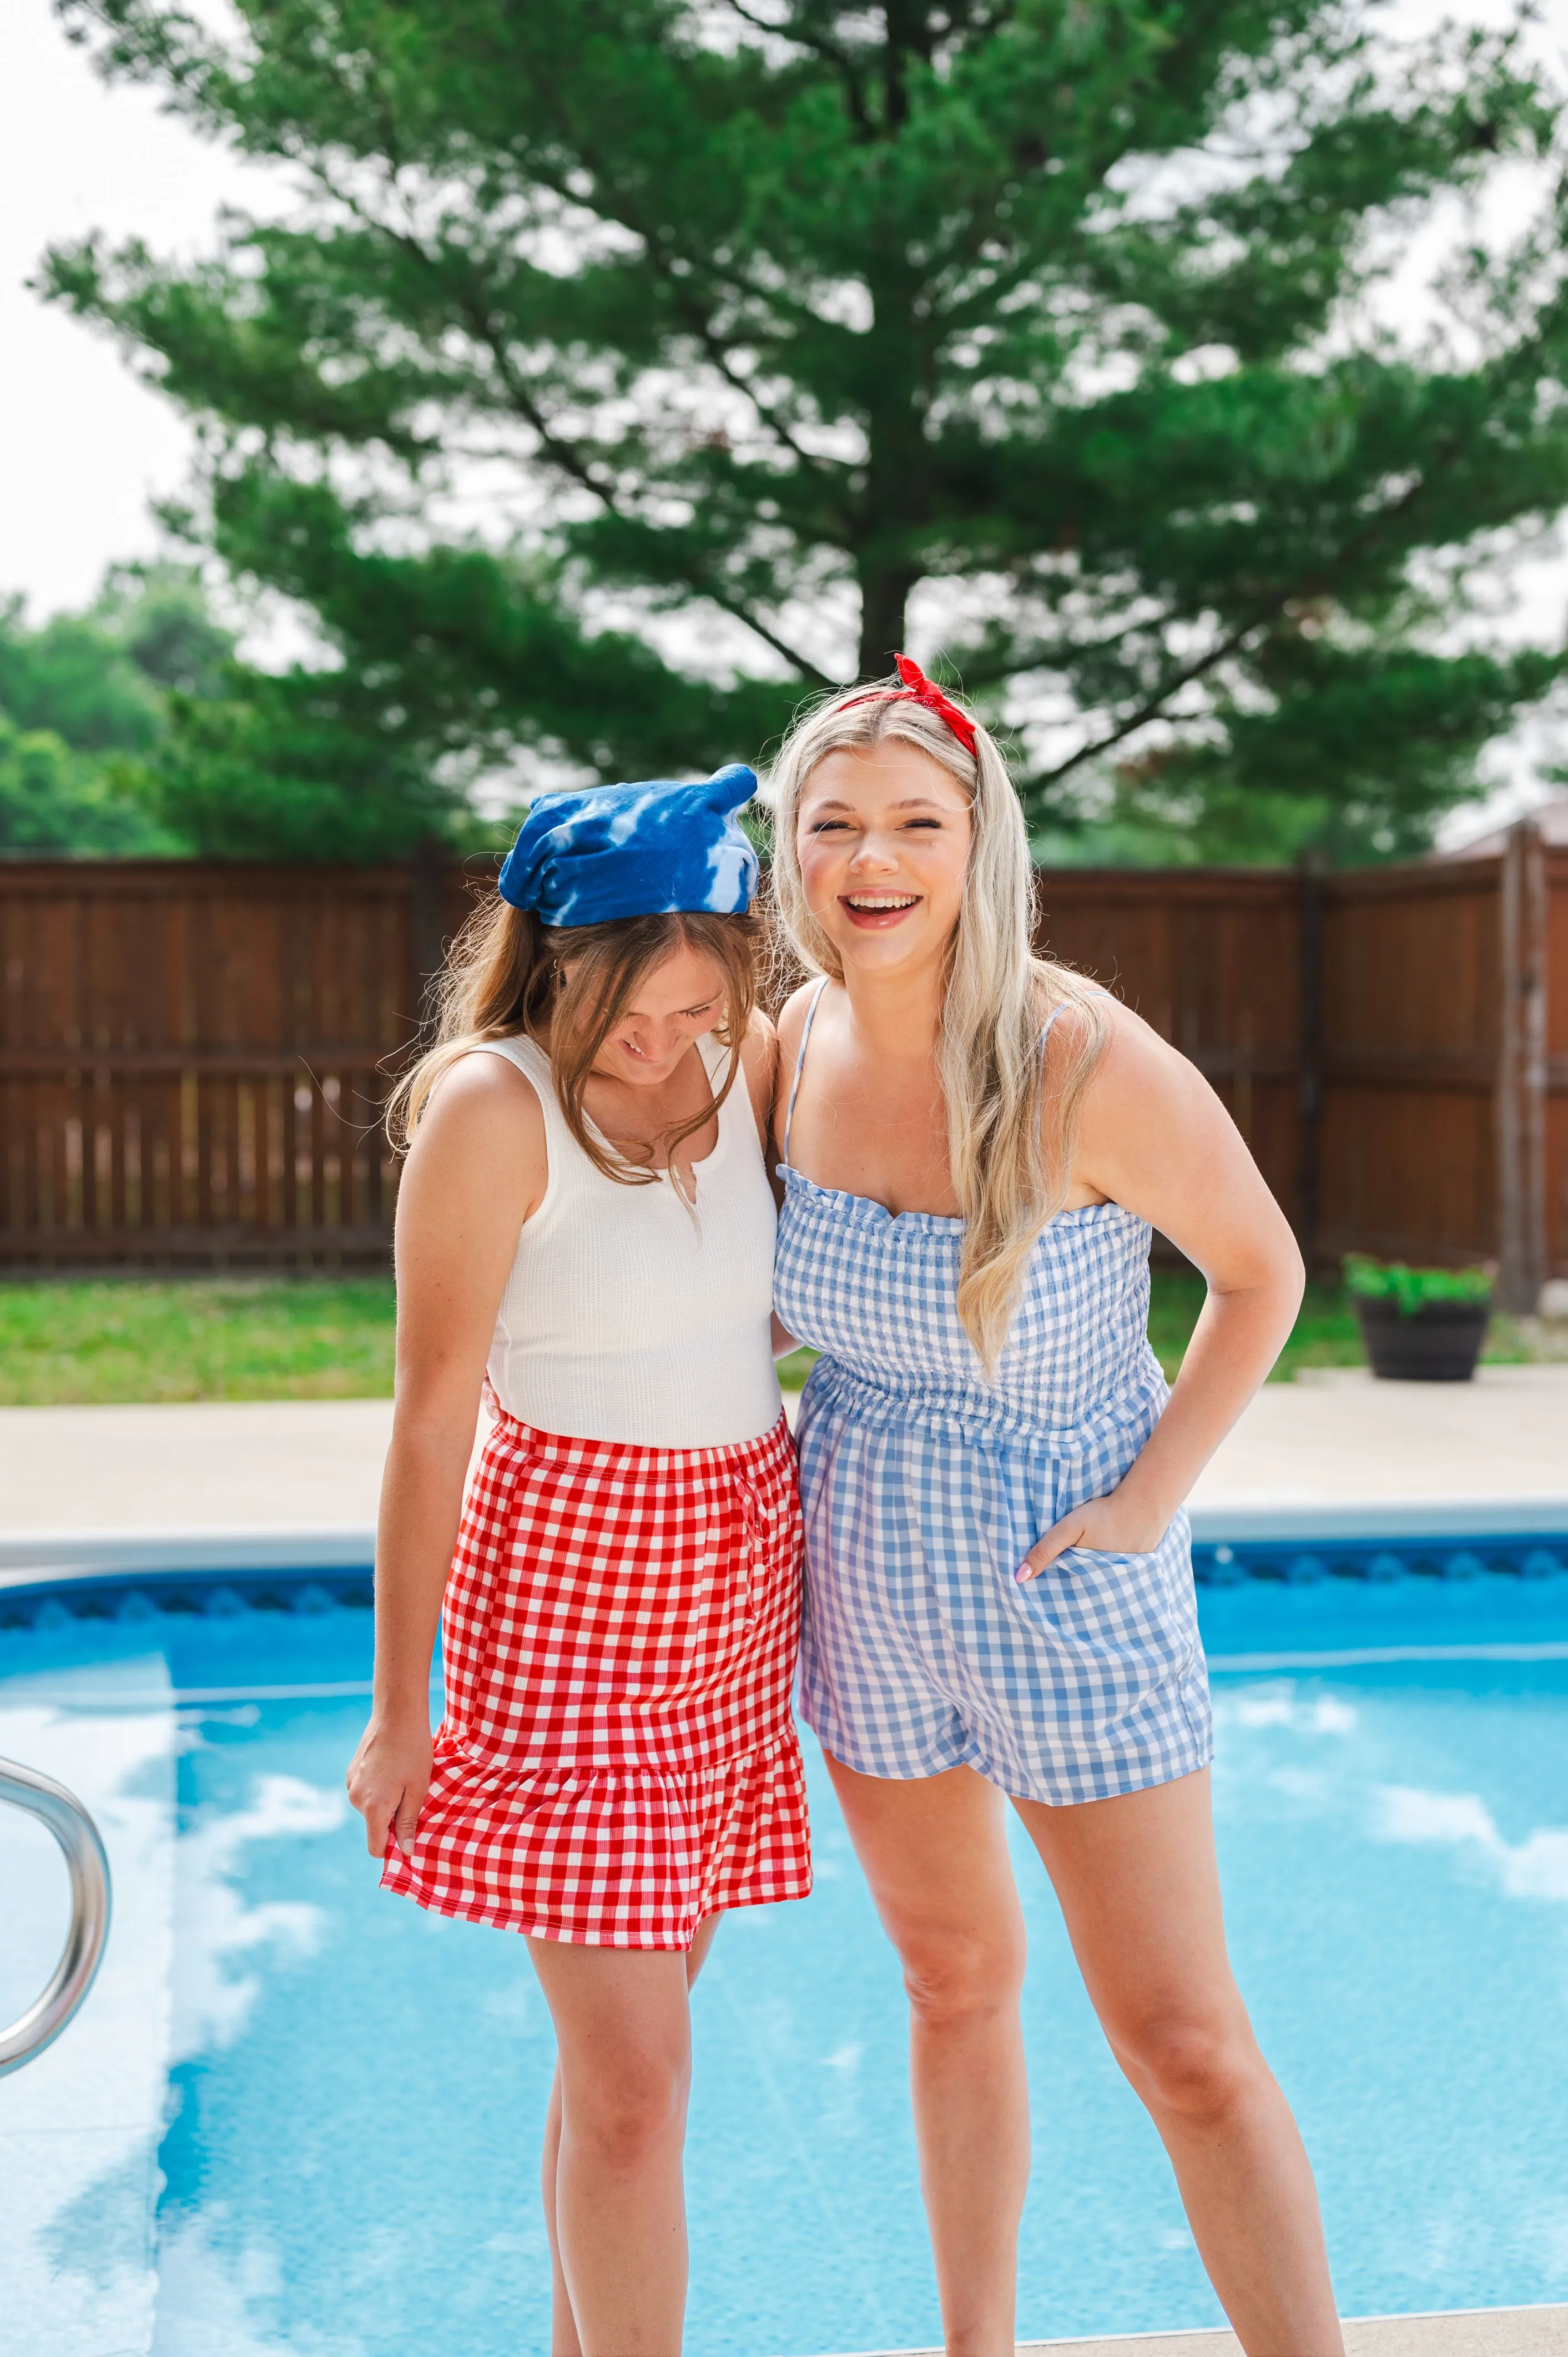 Two smiling young women standing by a pool, one wearing a red checkered skirt and the other in a blue checkered romper, with a plush dolphin on the head of the first woman.